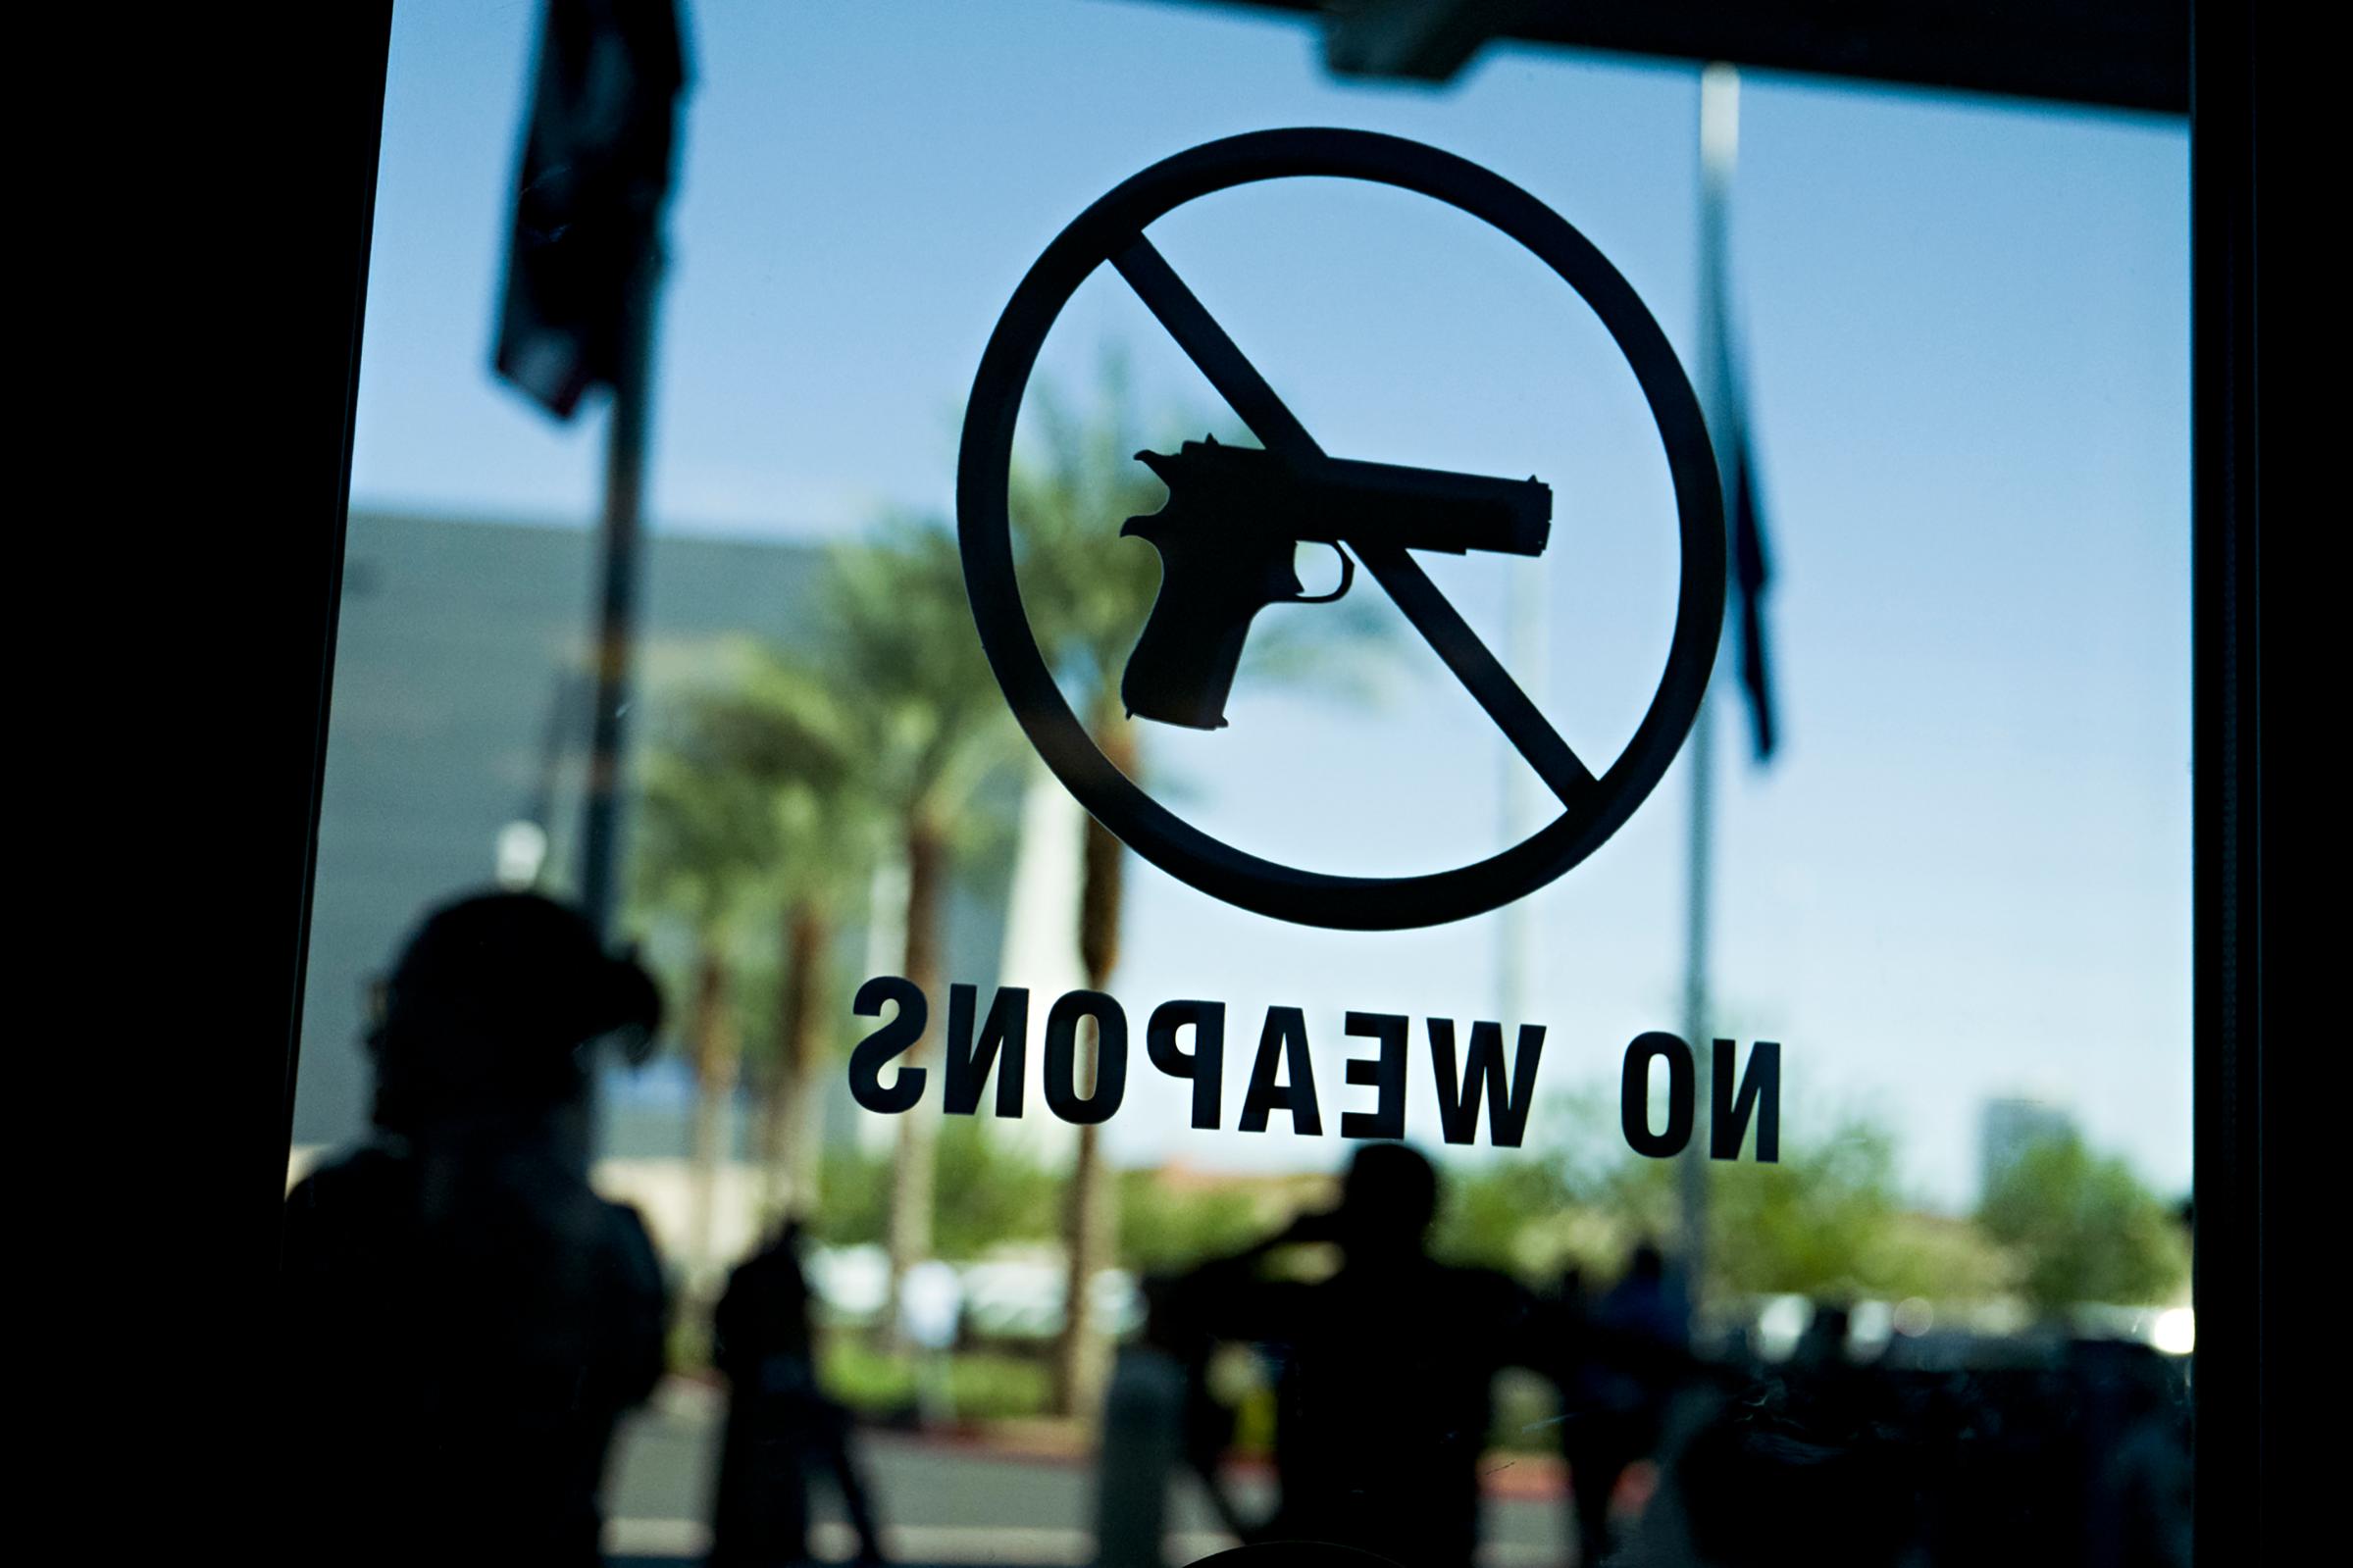 A "no Weapons" sign on a door of the Las Vegas Metropolitan Police Department headquarters.